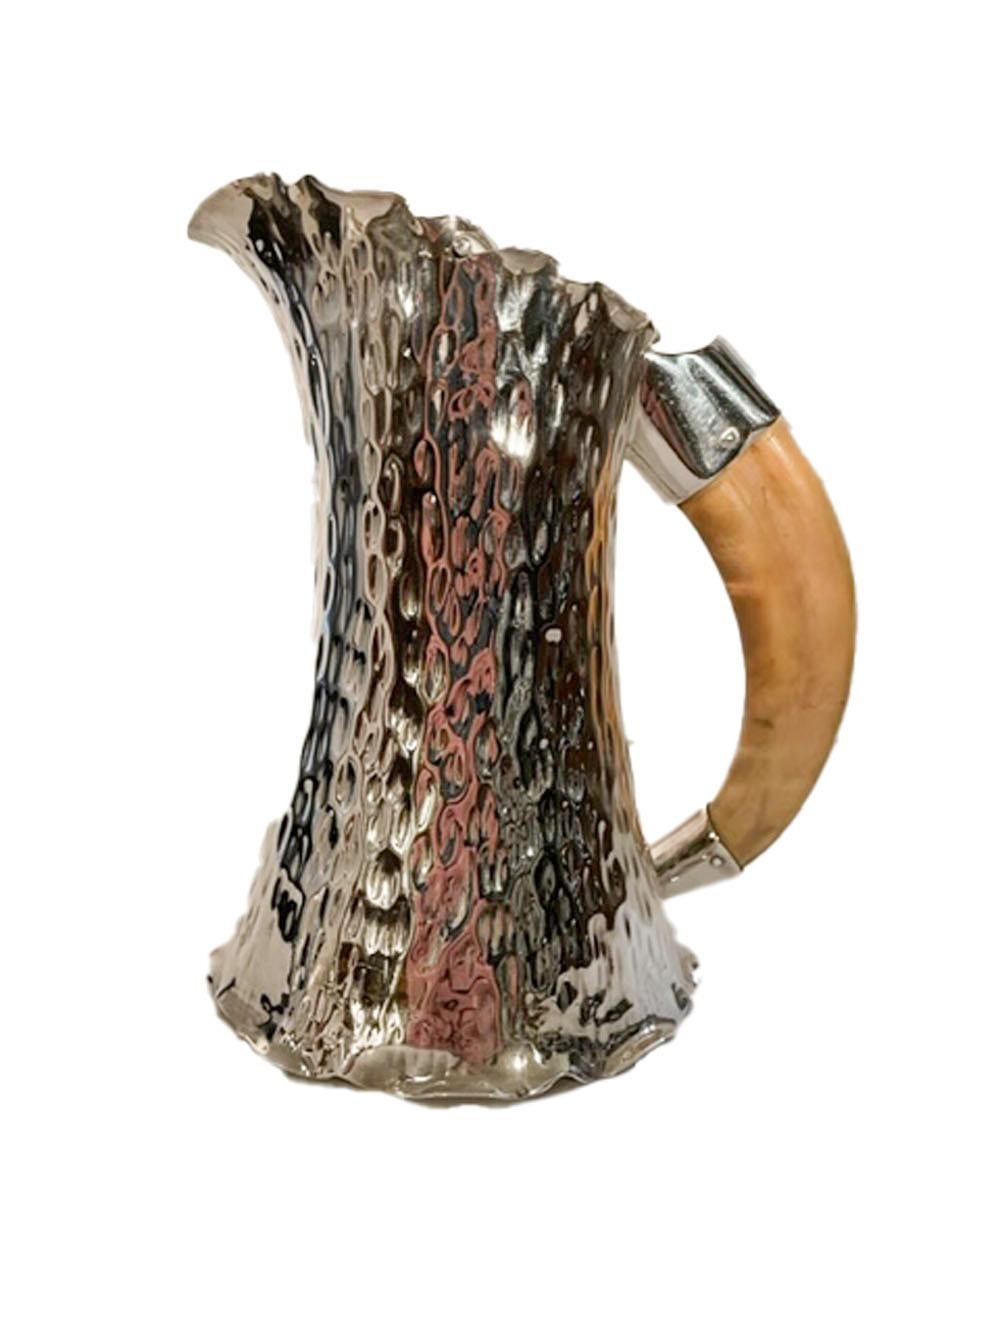 Edwardian silver plate pitcher in the form of a tree trunk and hammered to resemble the tree's bark with a boar tusk handle and pivoting lid. Marked H&H for Hukin and Heath.